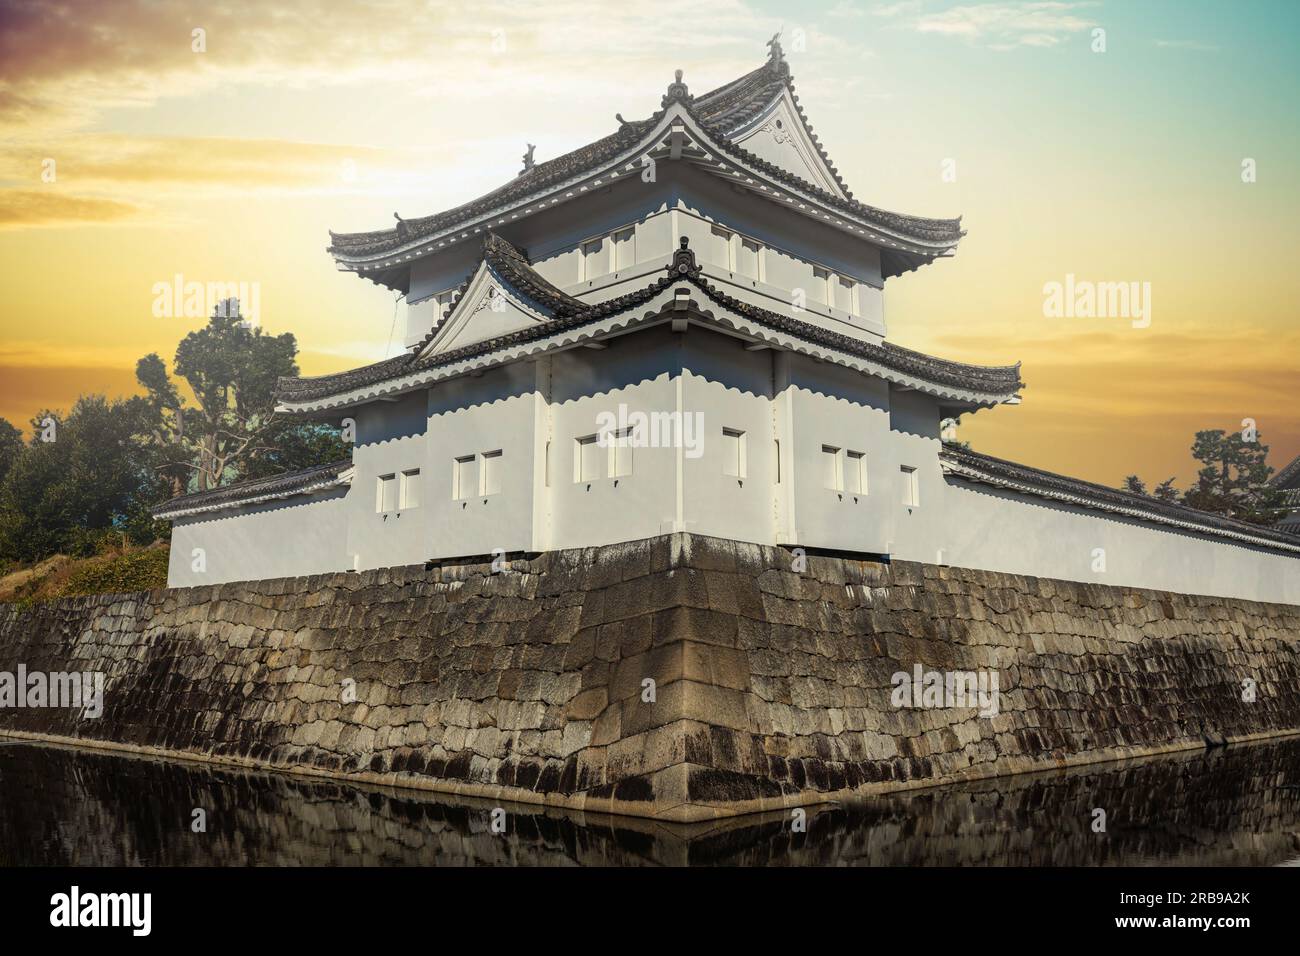 World Heritage Site: Nijo Castle (Nijo-jo), Kyoto, Japan. Built in 1603 and completed in 1626. Residence of the first Tokugawa Shogun Ieyasu.  This is Stock Photo